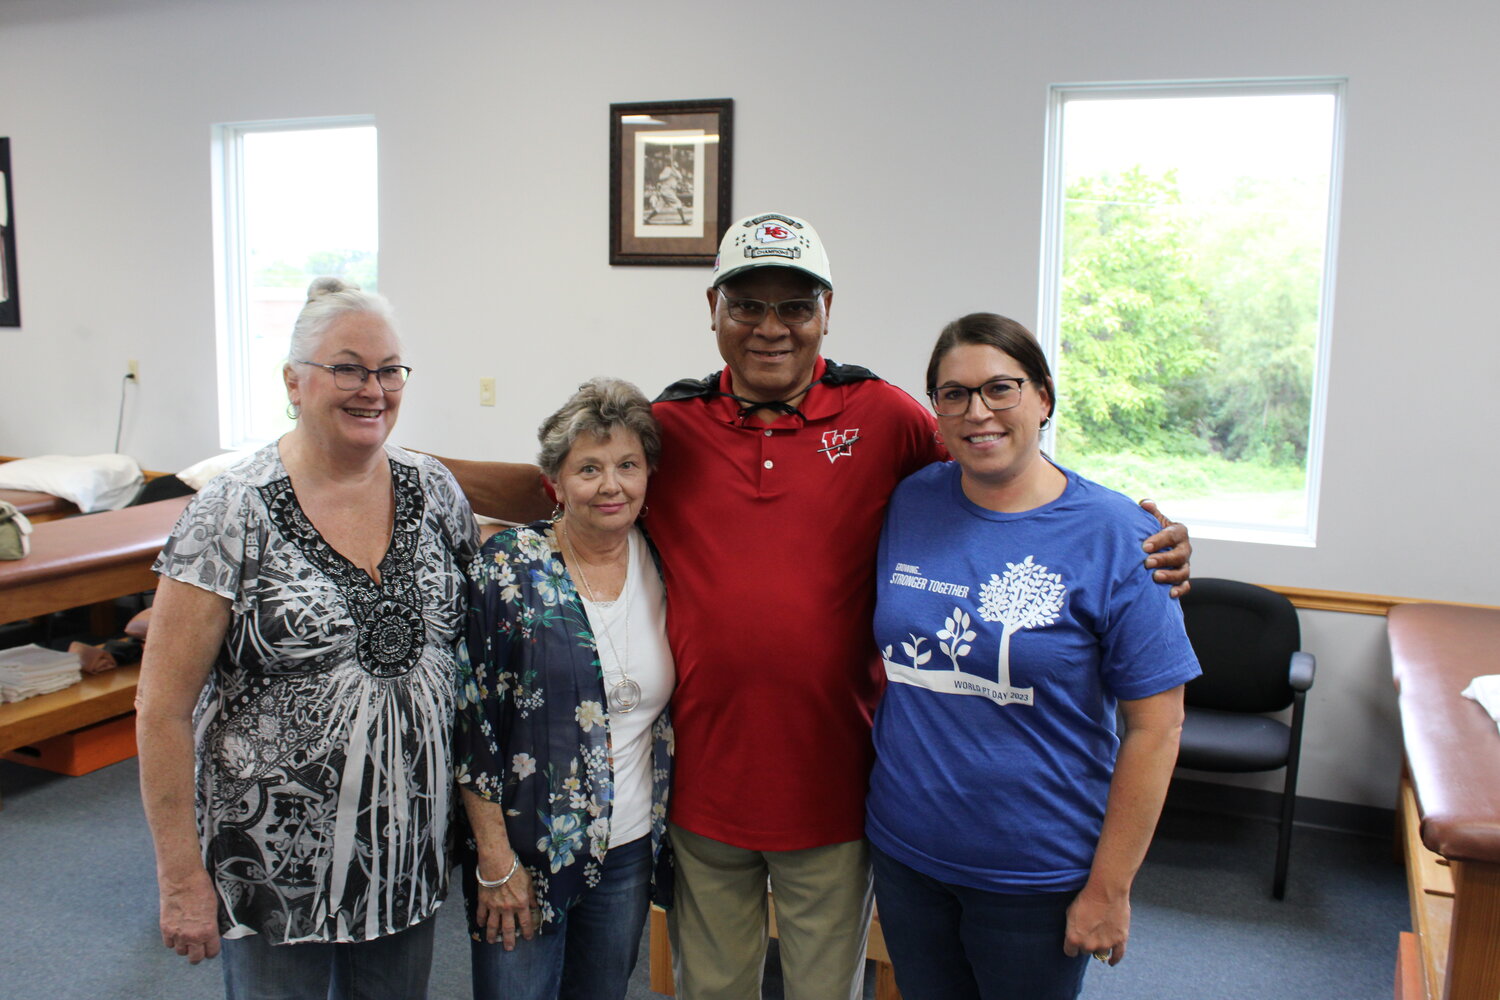 Alfred Wheeler was joined by Rita Ricker, Pam Van Horn and Shannon Schutte at Excel Physical Therapy in Warrenton. The three women, including Van Horn, who nominated Wheeler for the honor, were there to celebrate his selection as this month’s Hidden Hero.